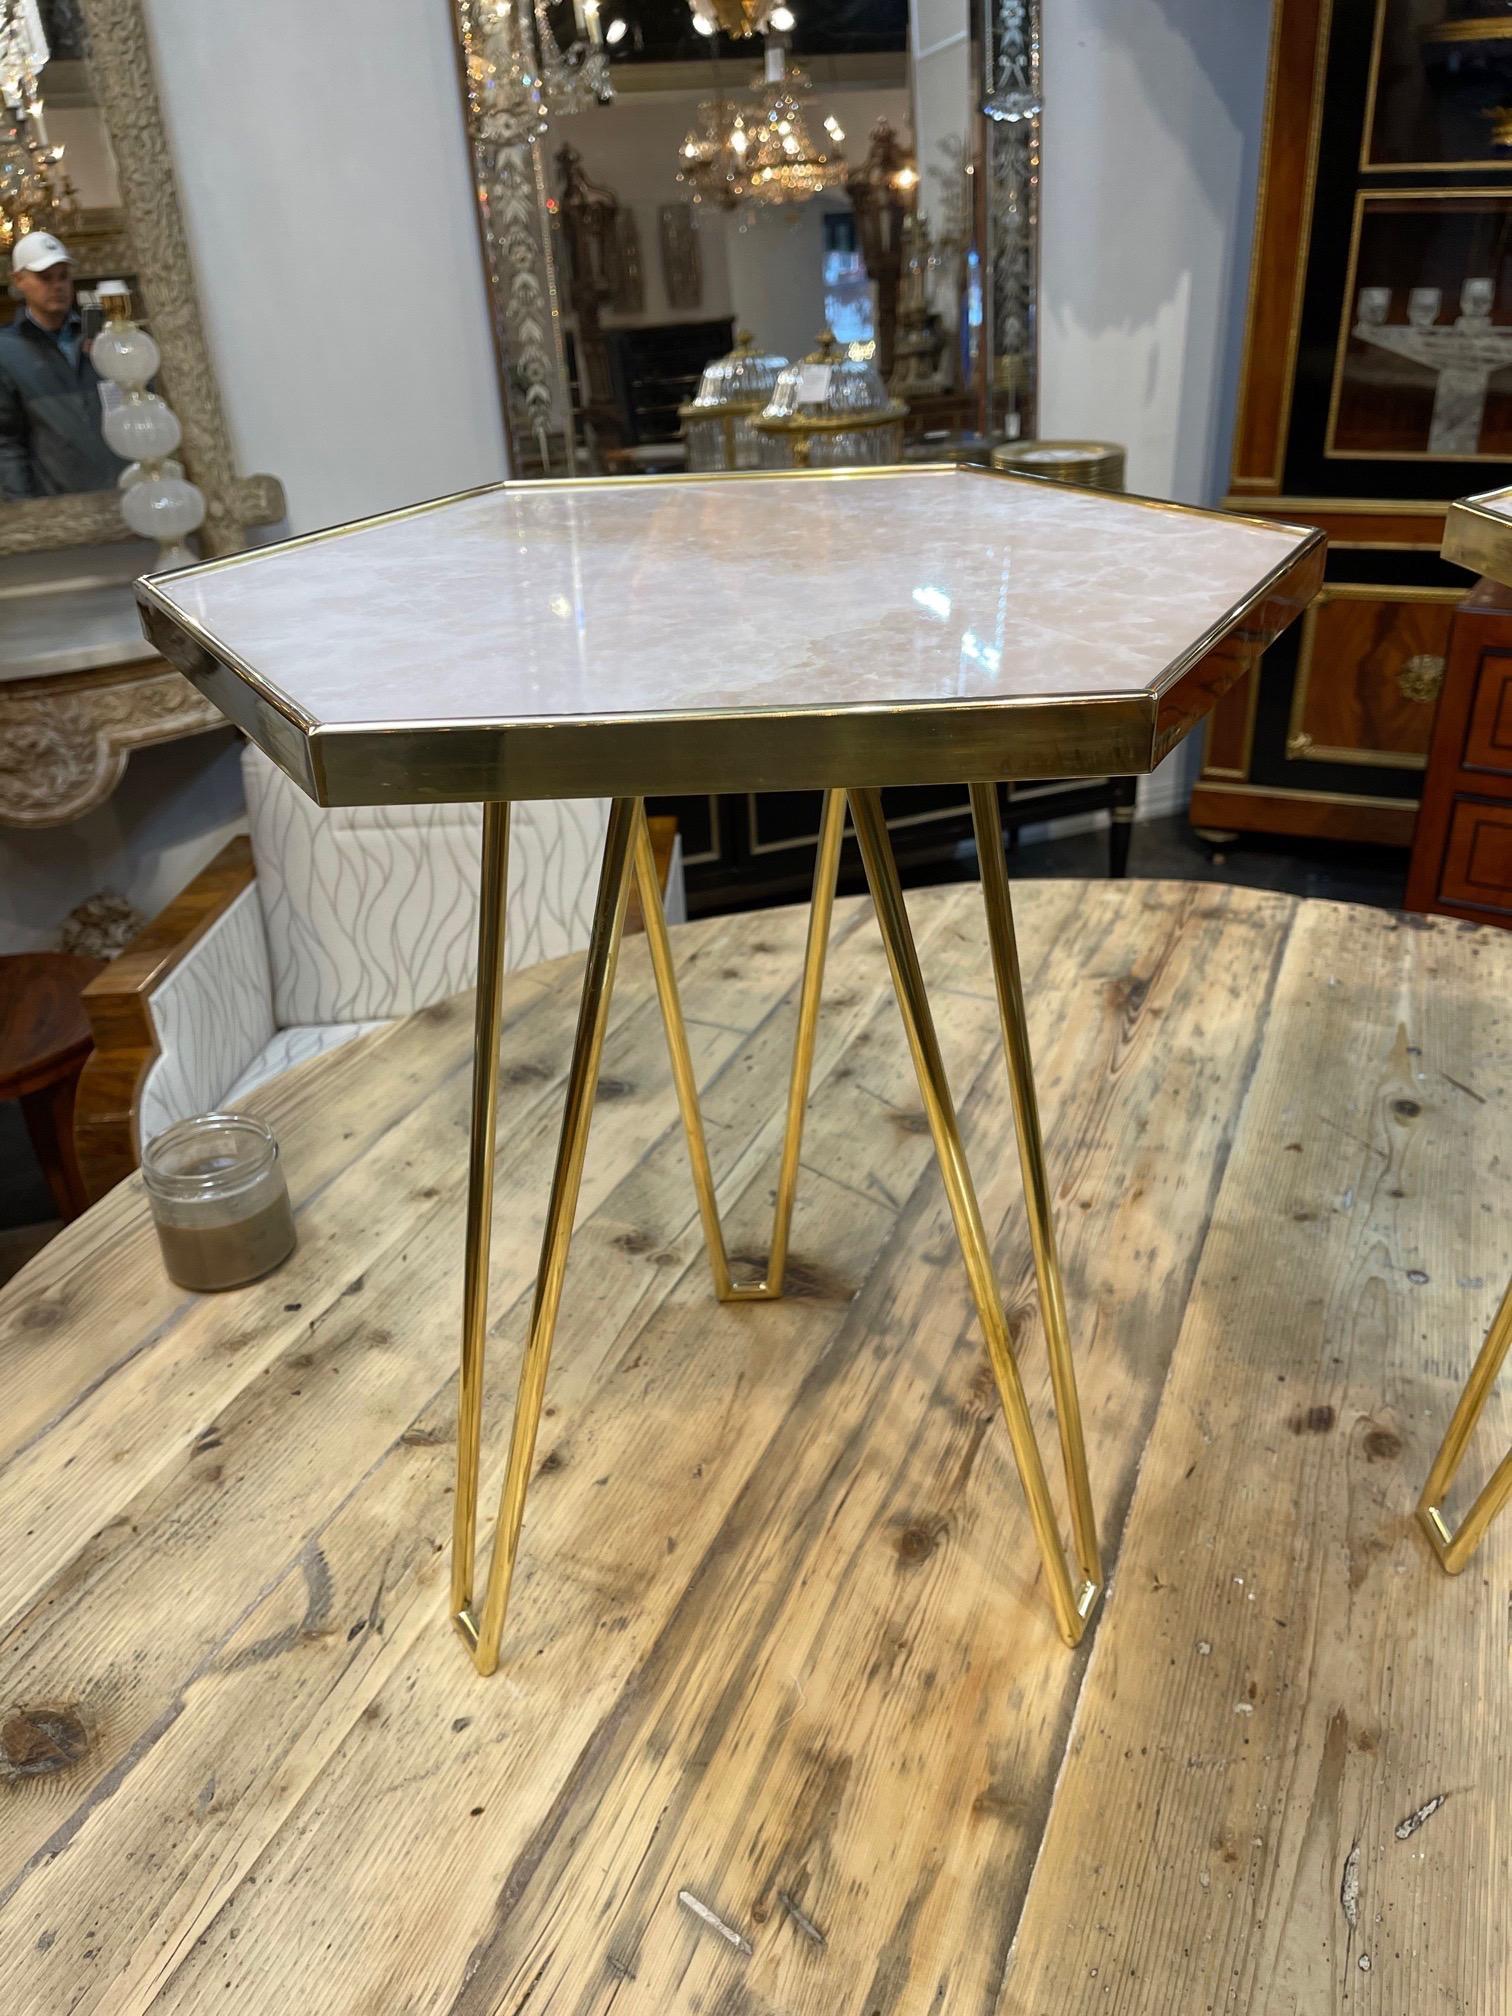 Exquisite pair of Italian brass and onyx hex form side tables. Very fine quality. Creates a  high end look!